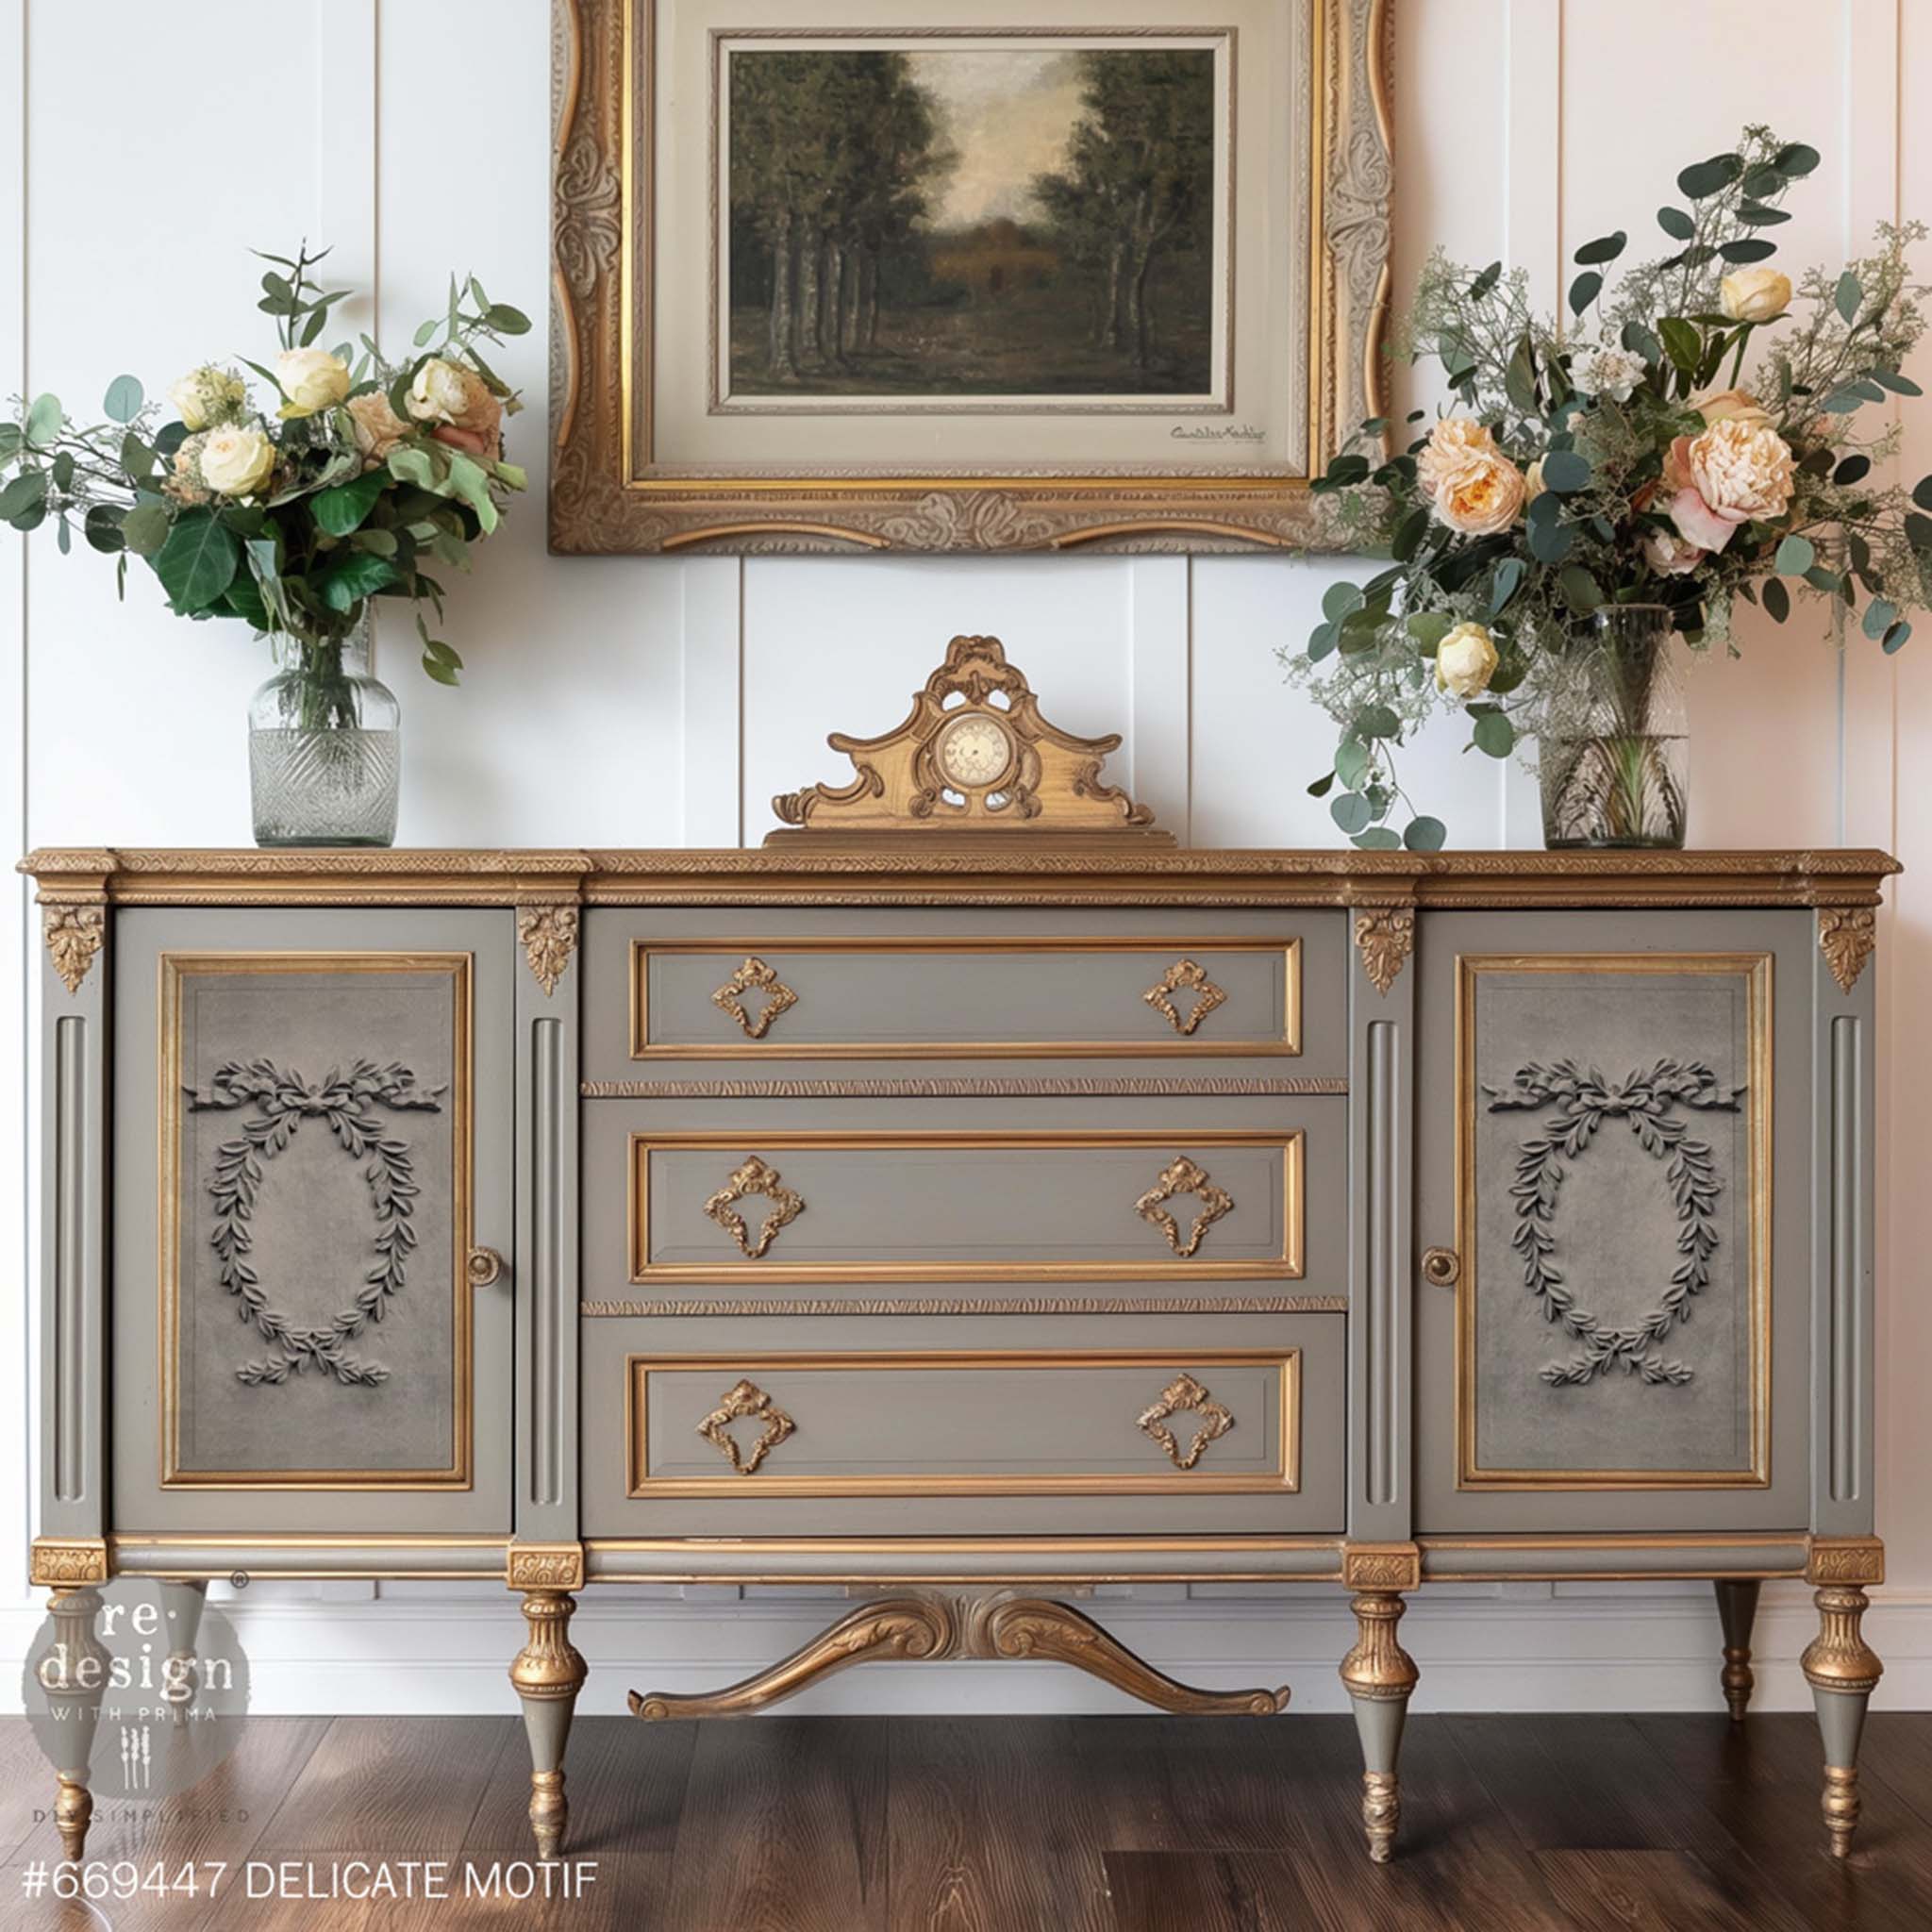 A vintage console table with drawers and doors is painted a warm gray with bronze accents and features ReDesign with Prima's Delicate Motif Decor Poly Casting bendable furniture appliques on the 2 doors.